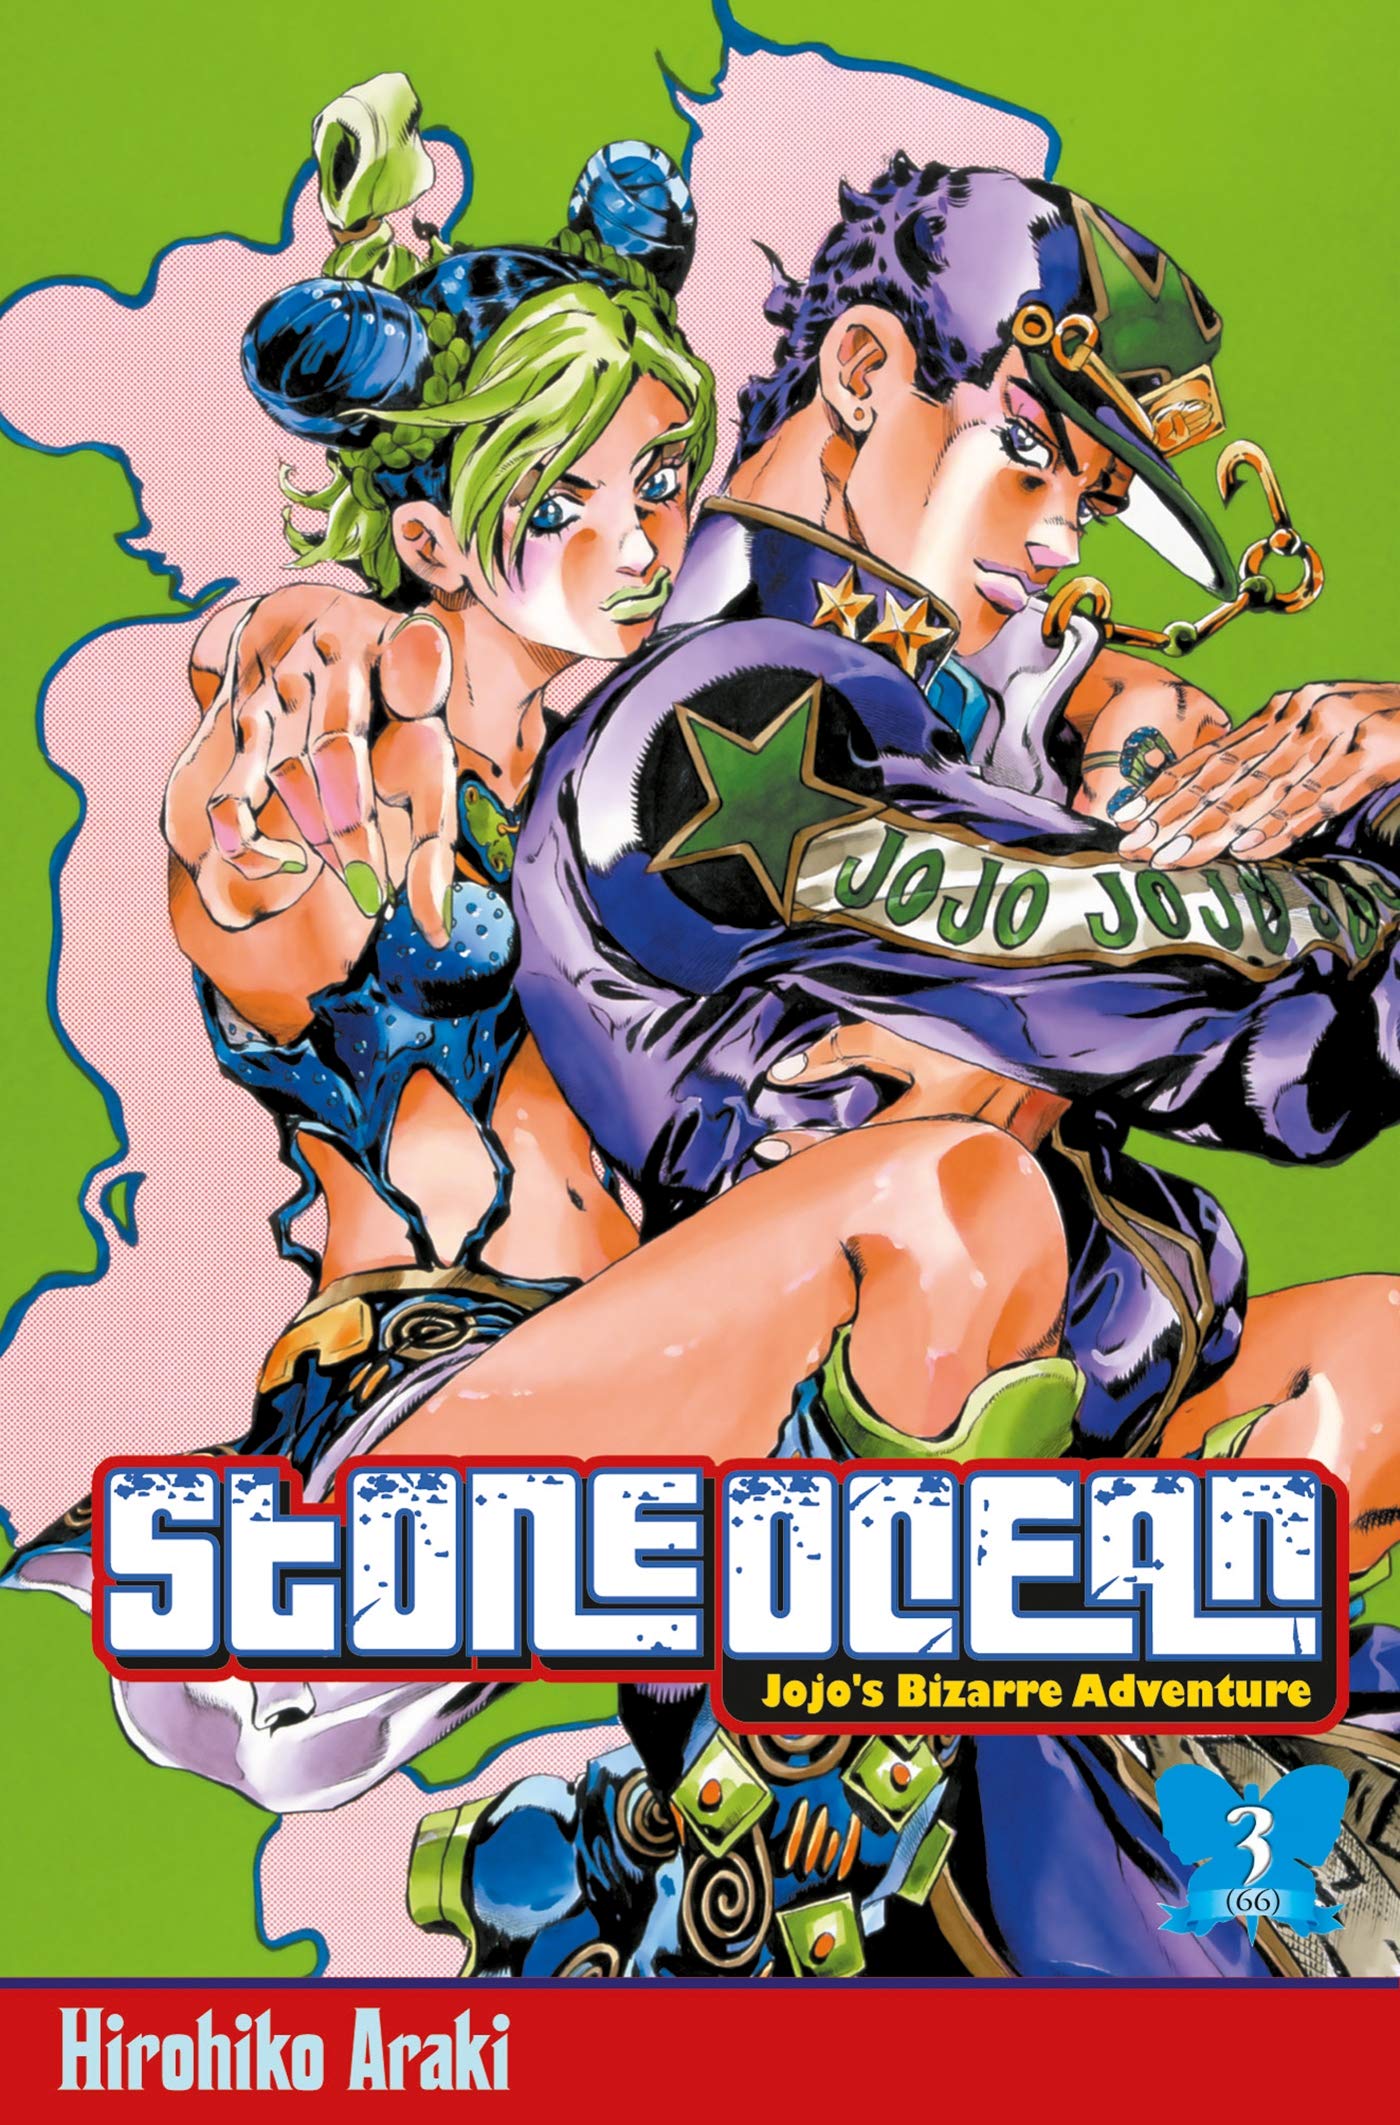 Jojo's bizarre adventure could have a new project in